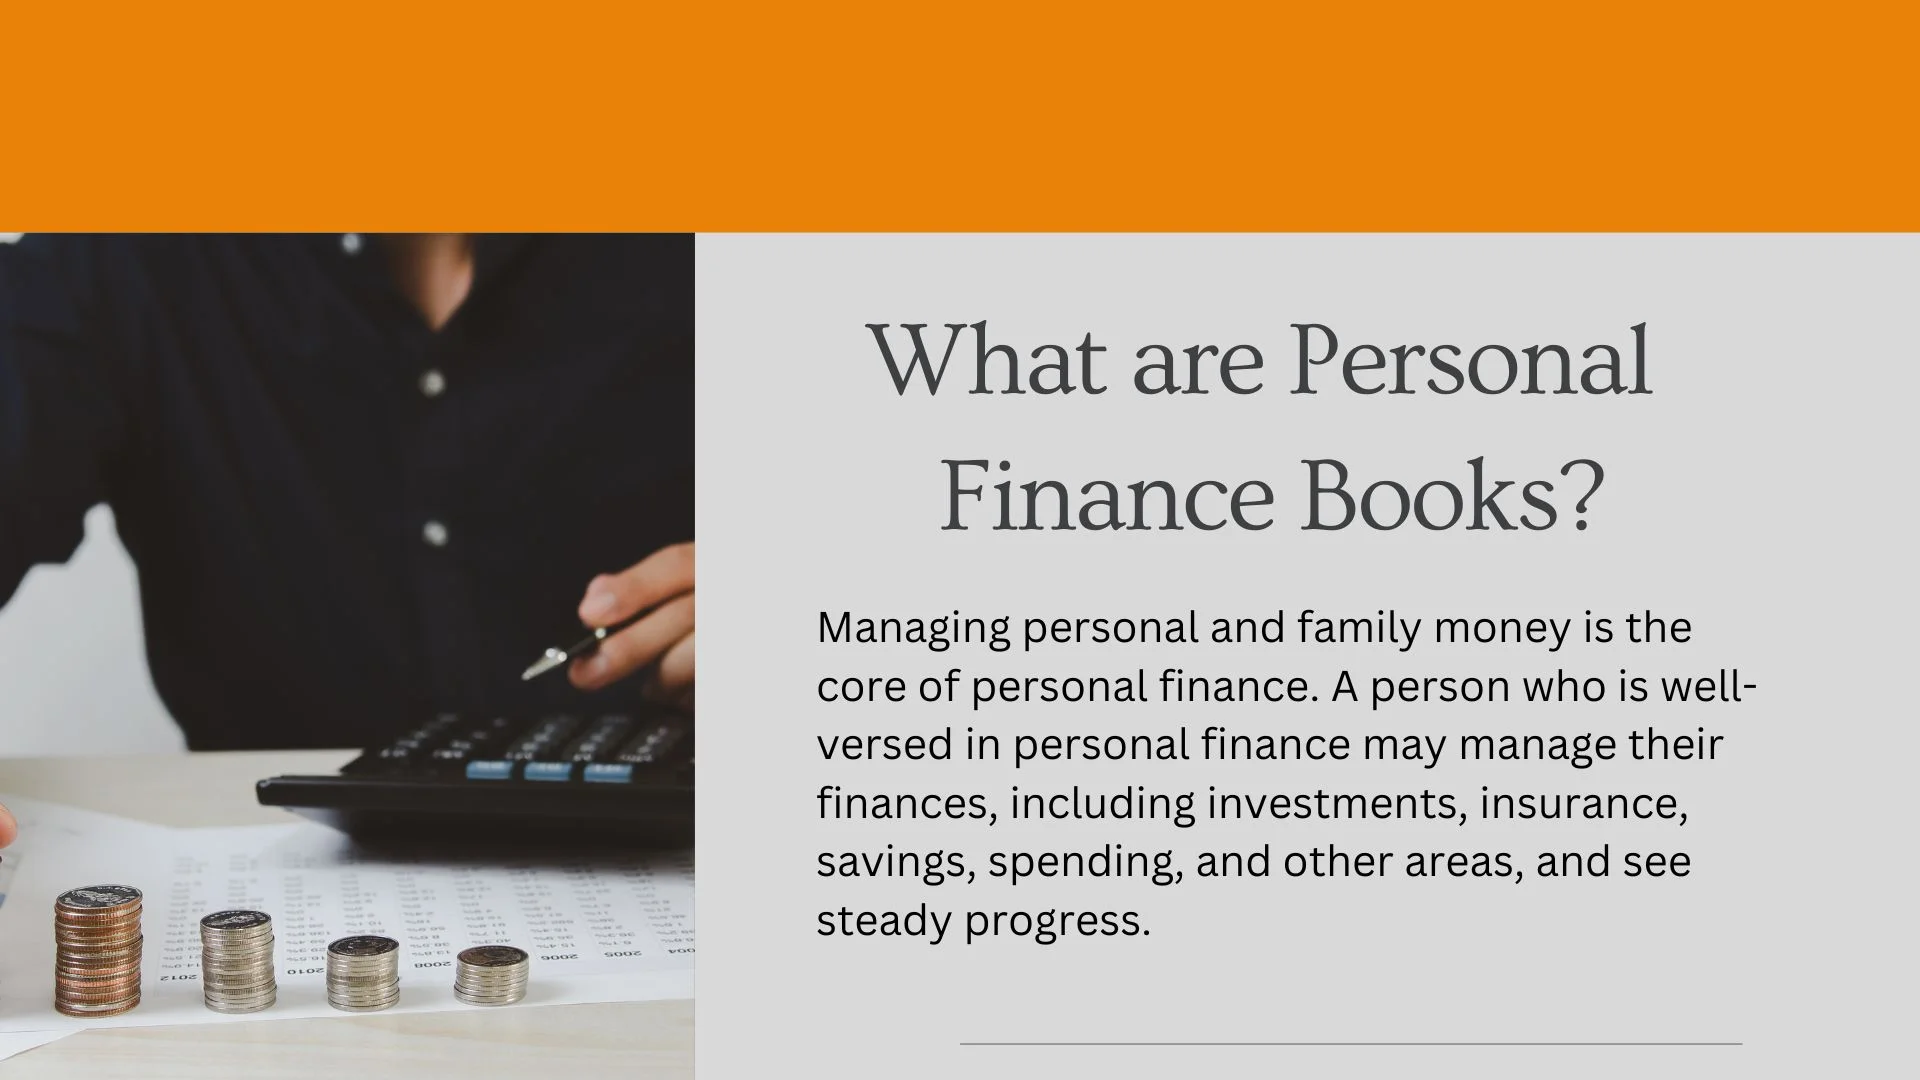 What are Personal Finance Books